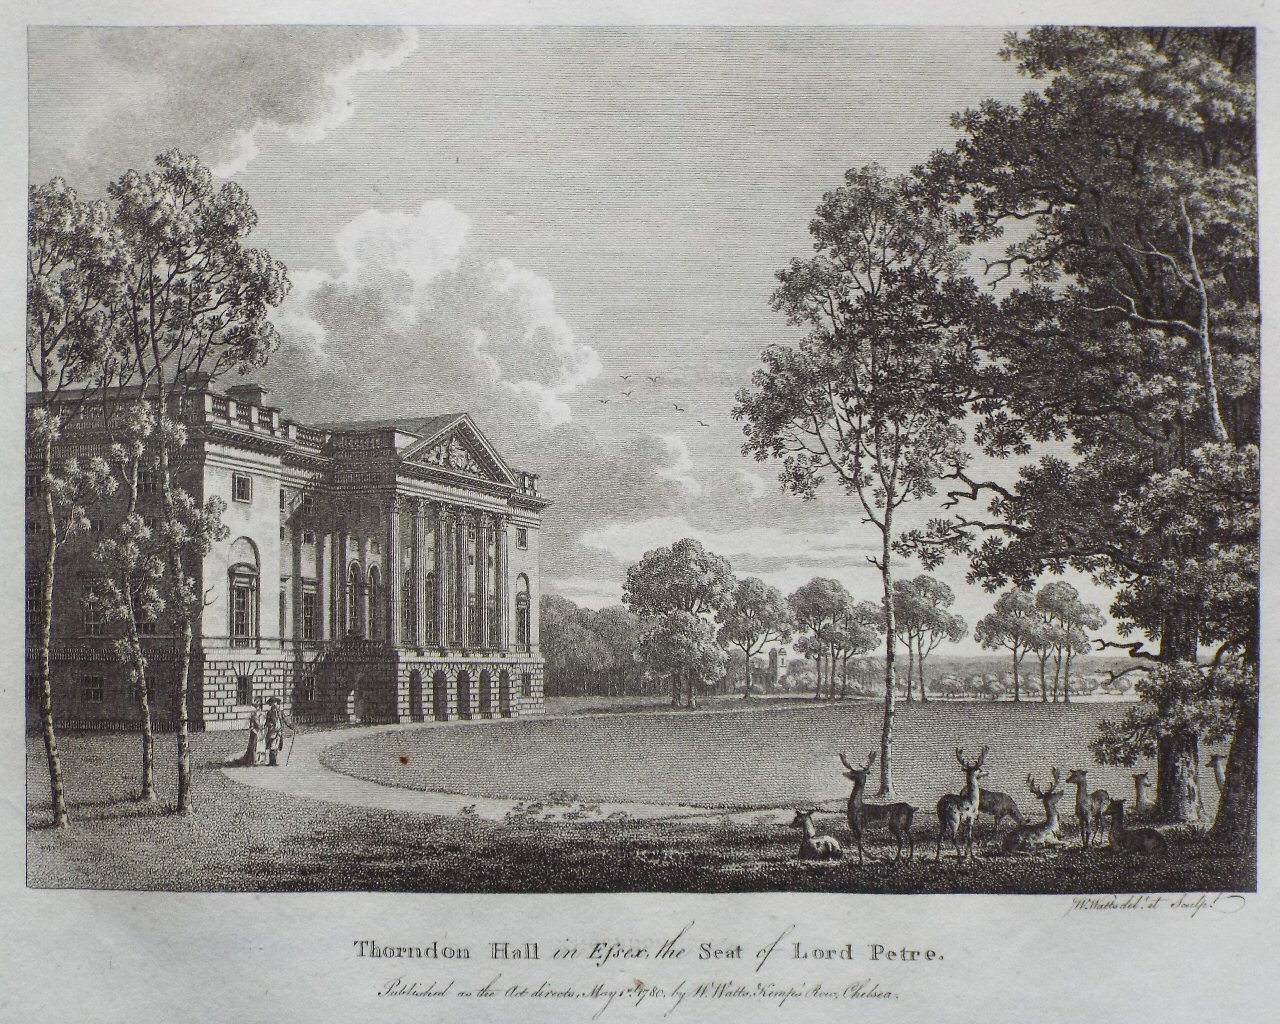 Print - Thorndon Hall in Essex, the Seat of Lord Petre. - Watts